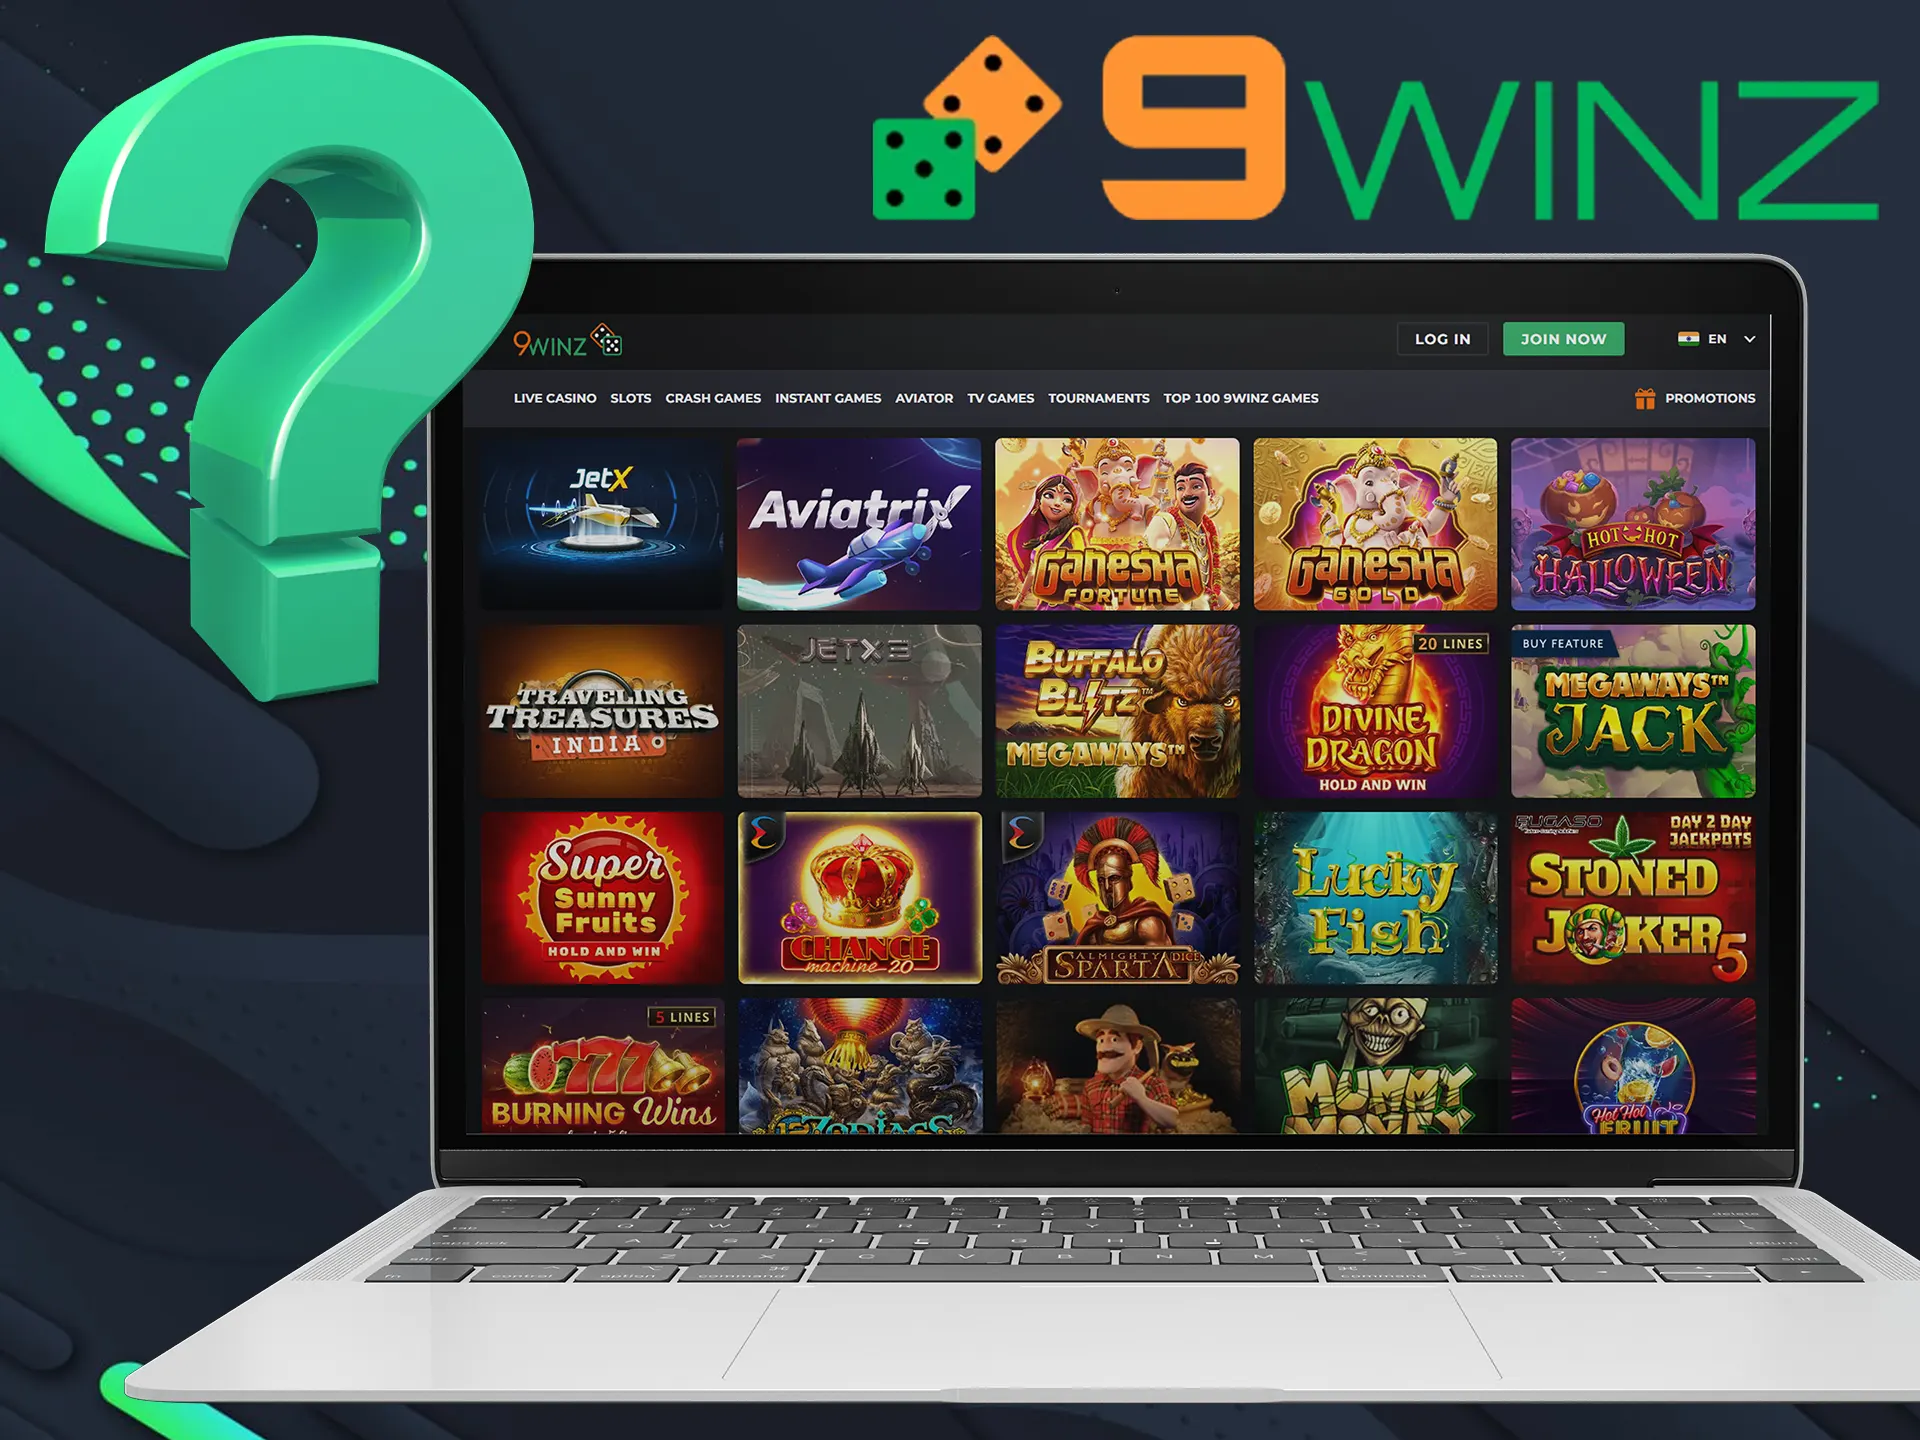 It's easy to start playing slots at the 9winz.